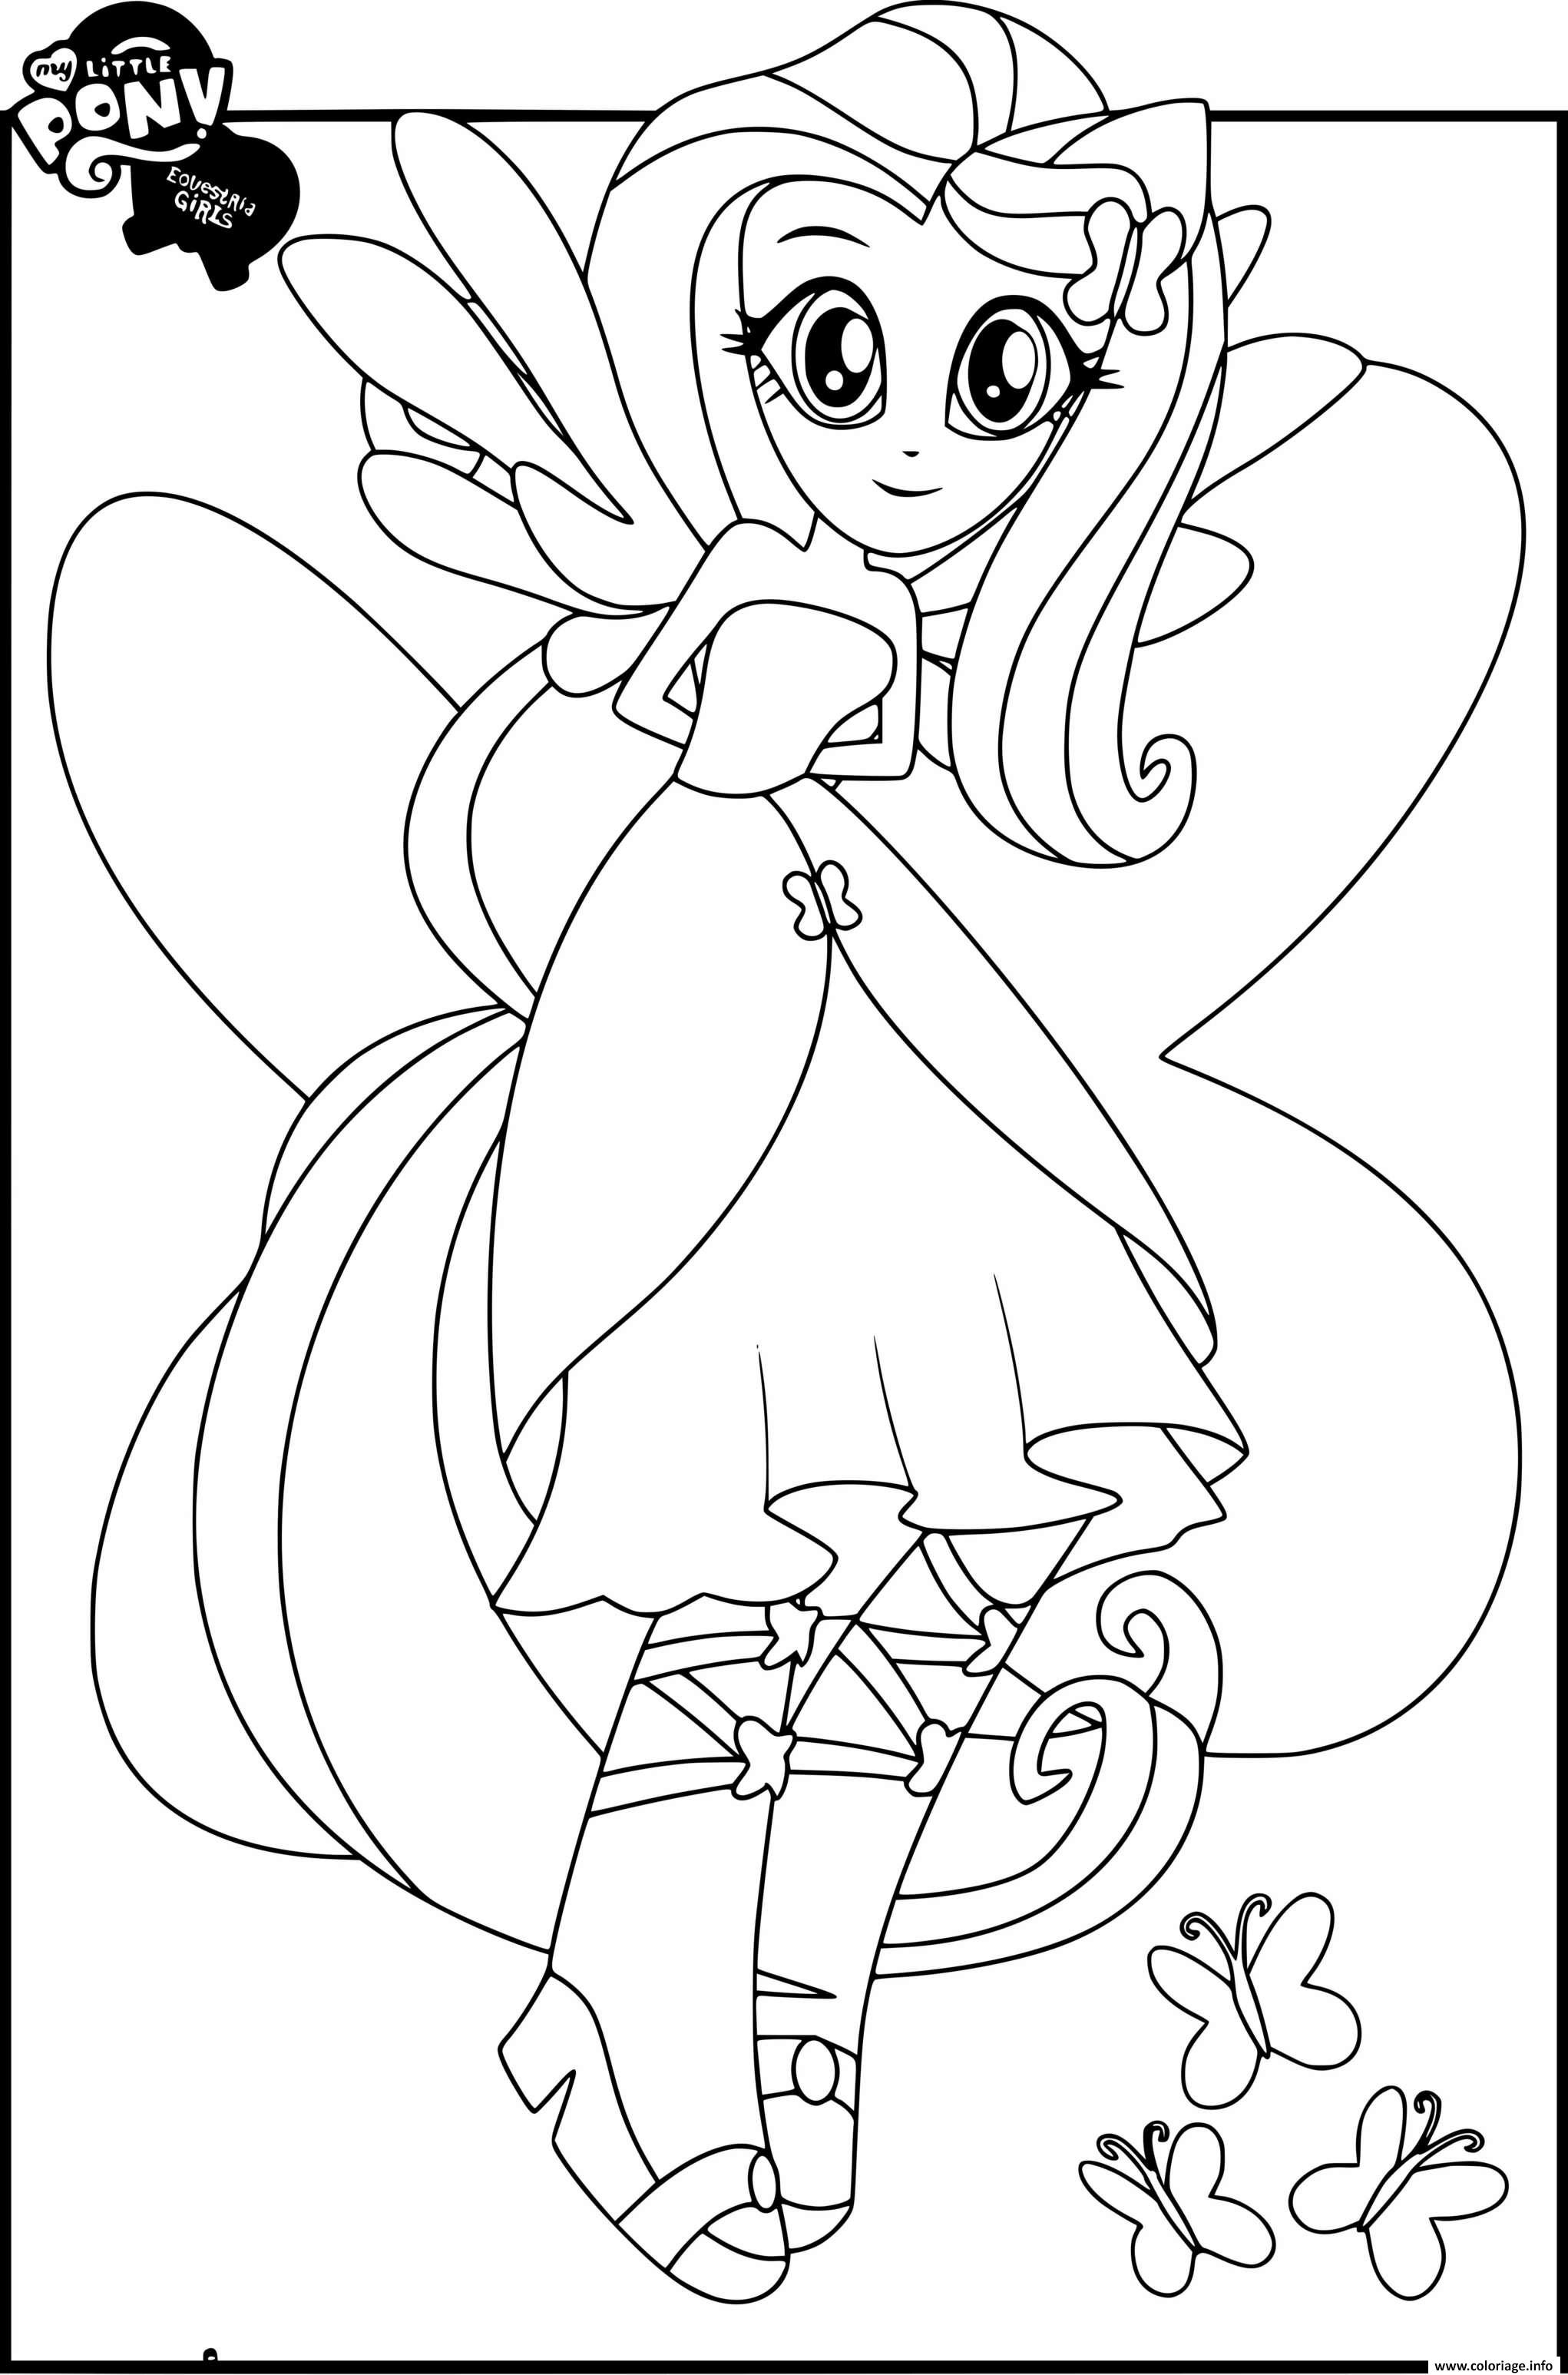 Coloriage My Little Pony Equestria Girls Fluttershy - JeColorie.com